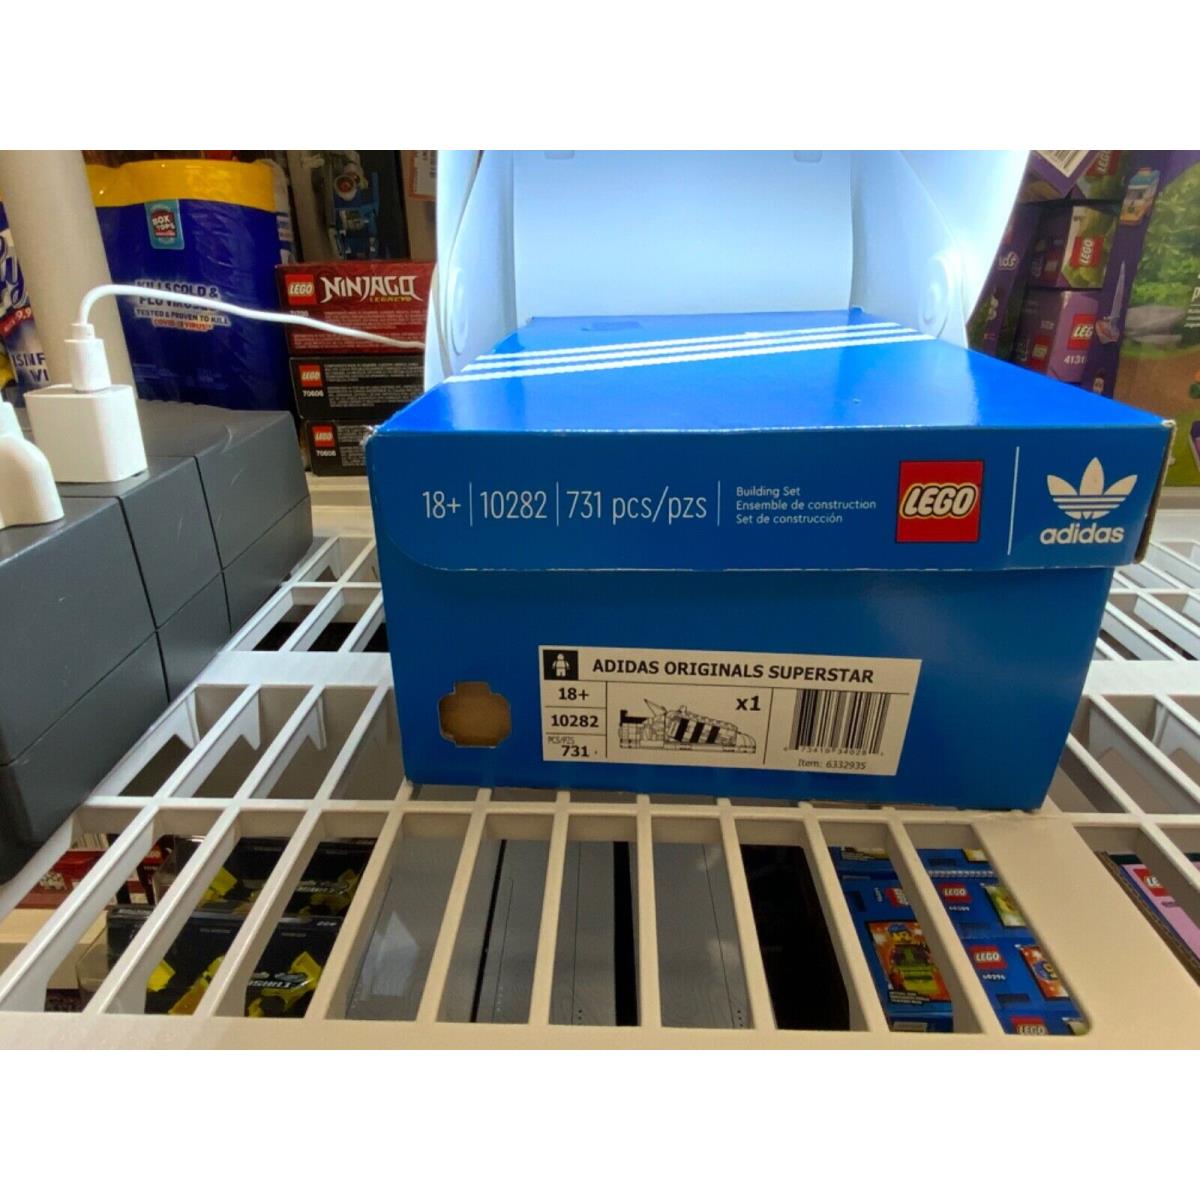 Lego Adidas Originals Superstar 10282 Building Kit Build and Display The Iconic